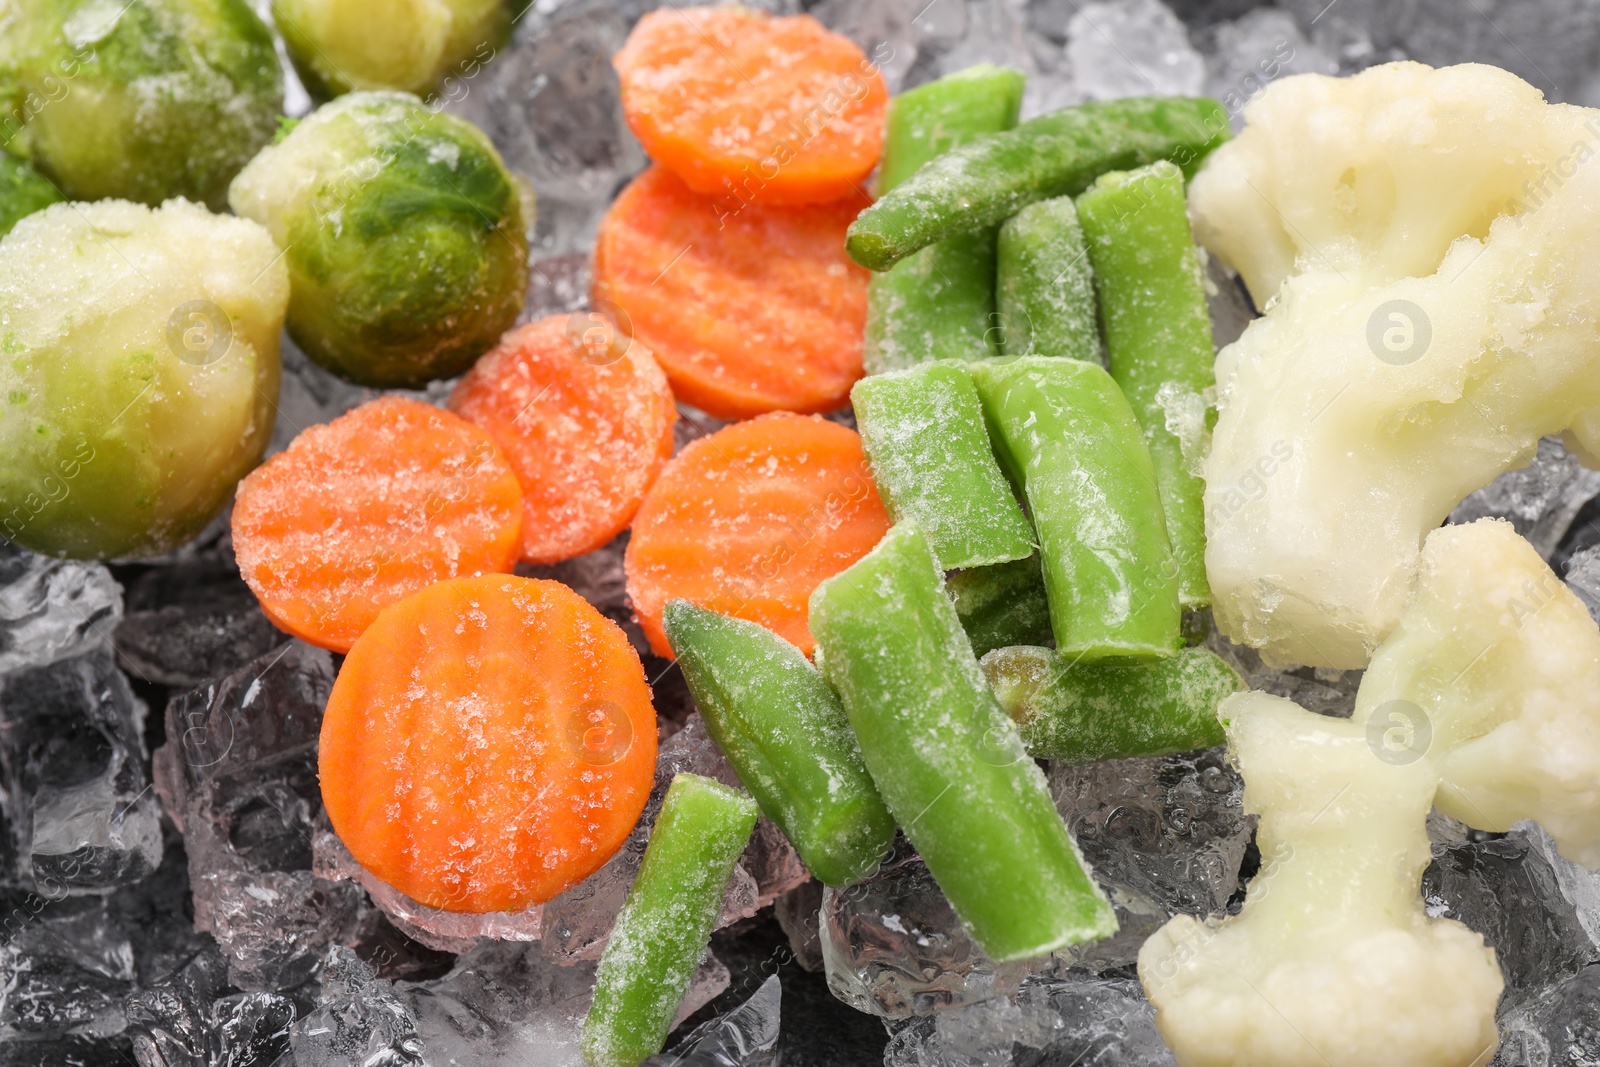 Photo of Different frozen vegetables and ice on black table, closeup